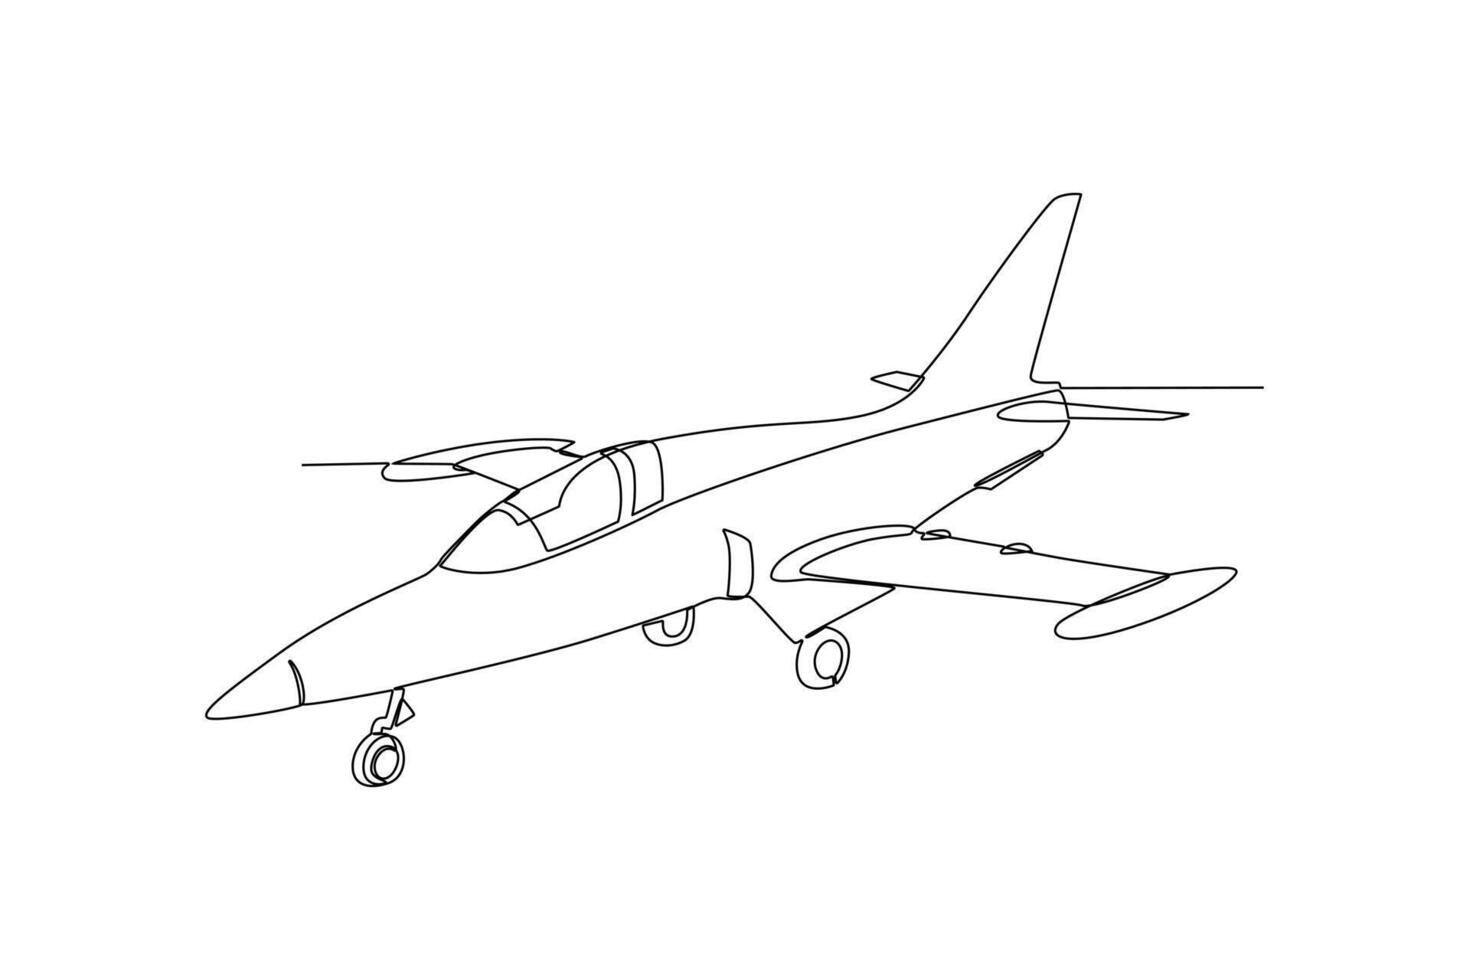 Continuous one line drawing Air transportation concept. Doodle vector illustration.